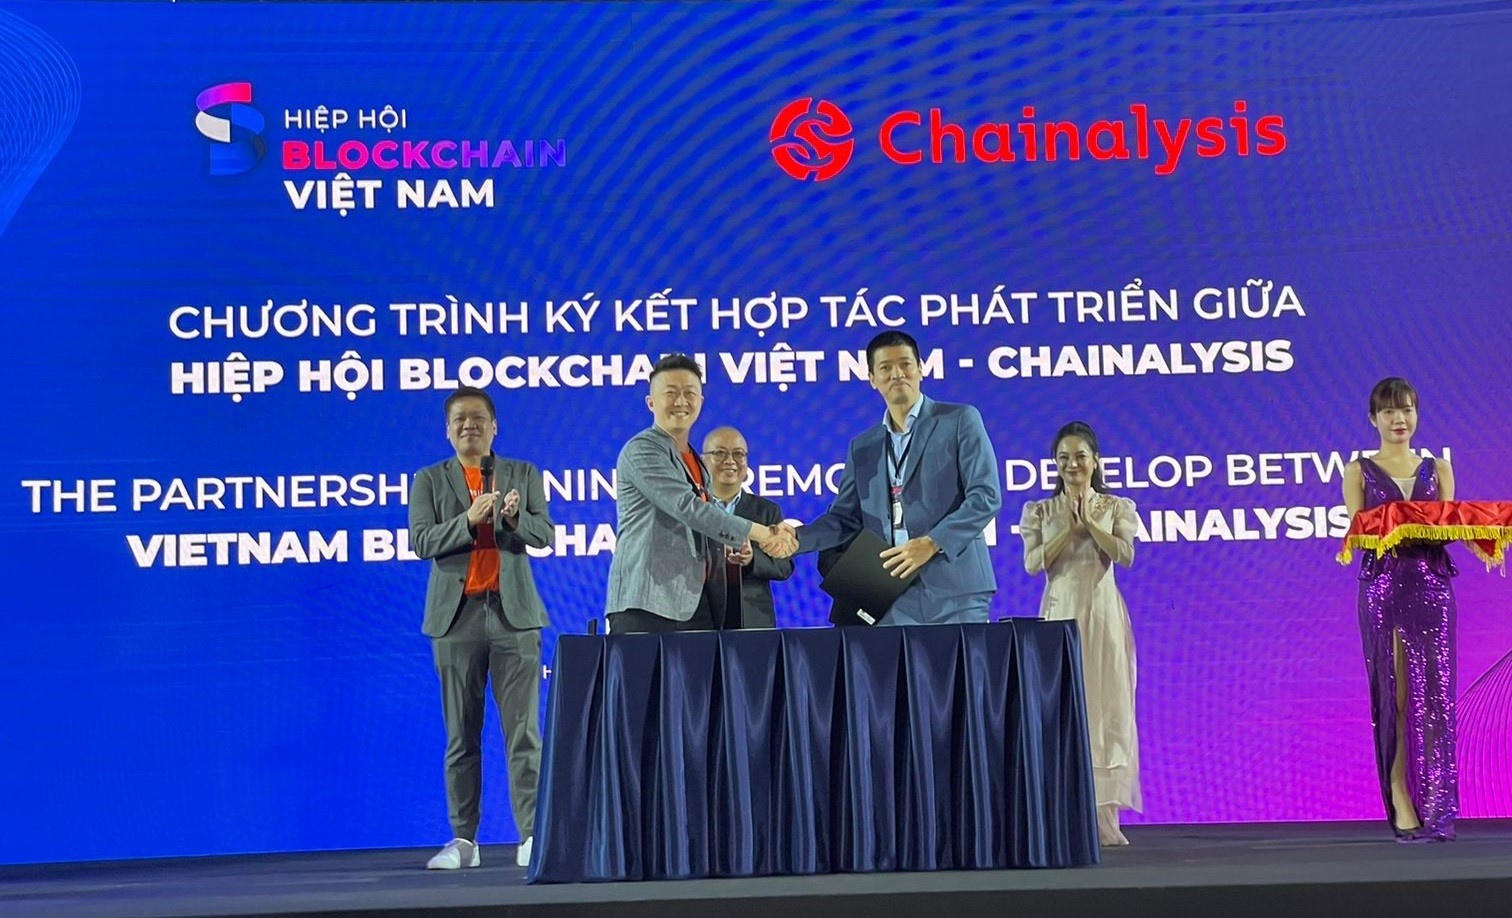 Representatives of Vietnam Blockchain Association and Chainalysis signed a cooperation agreement